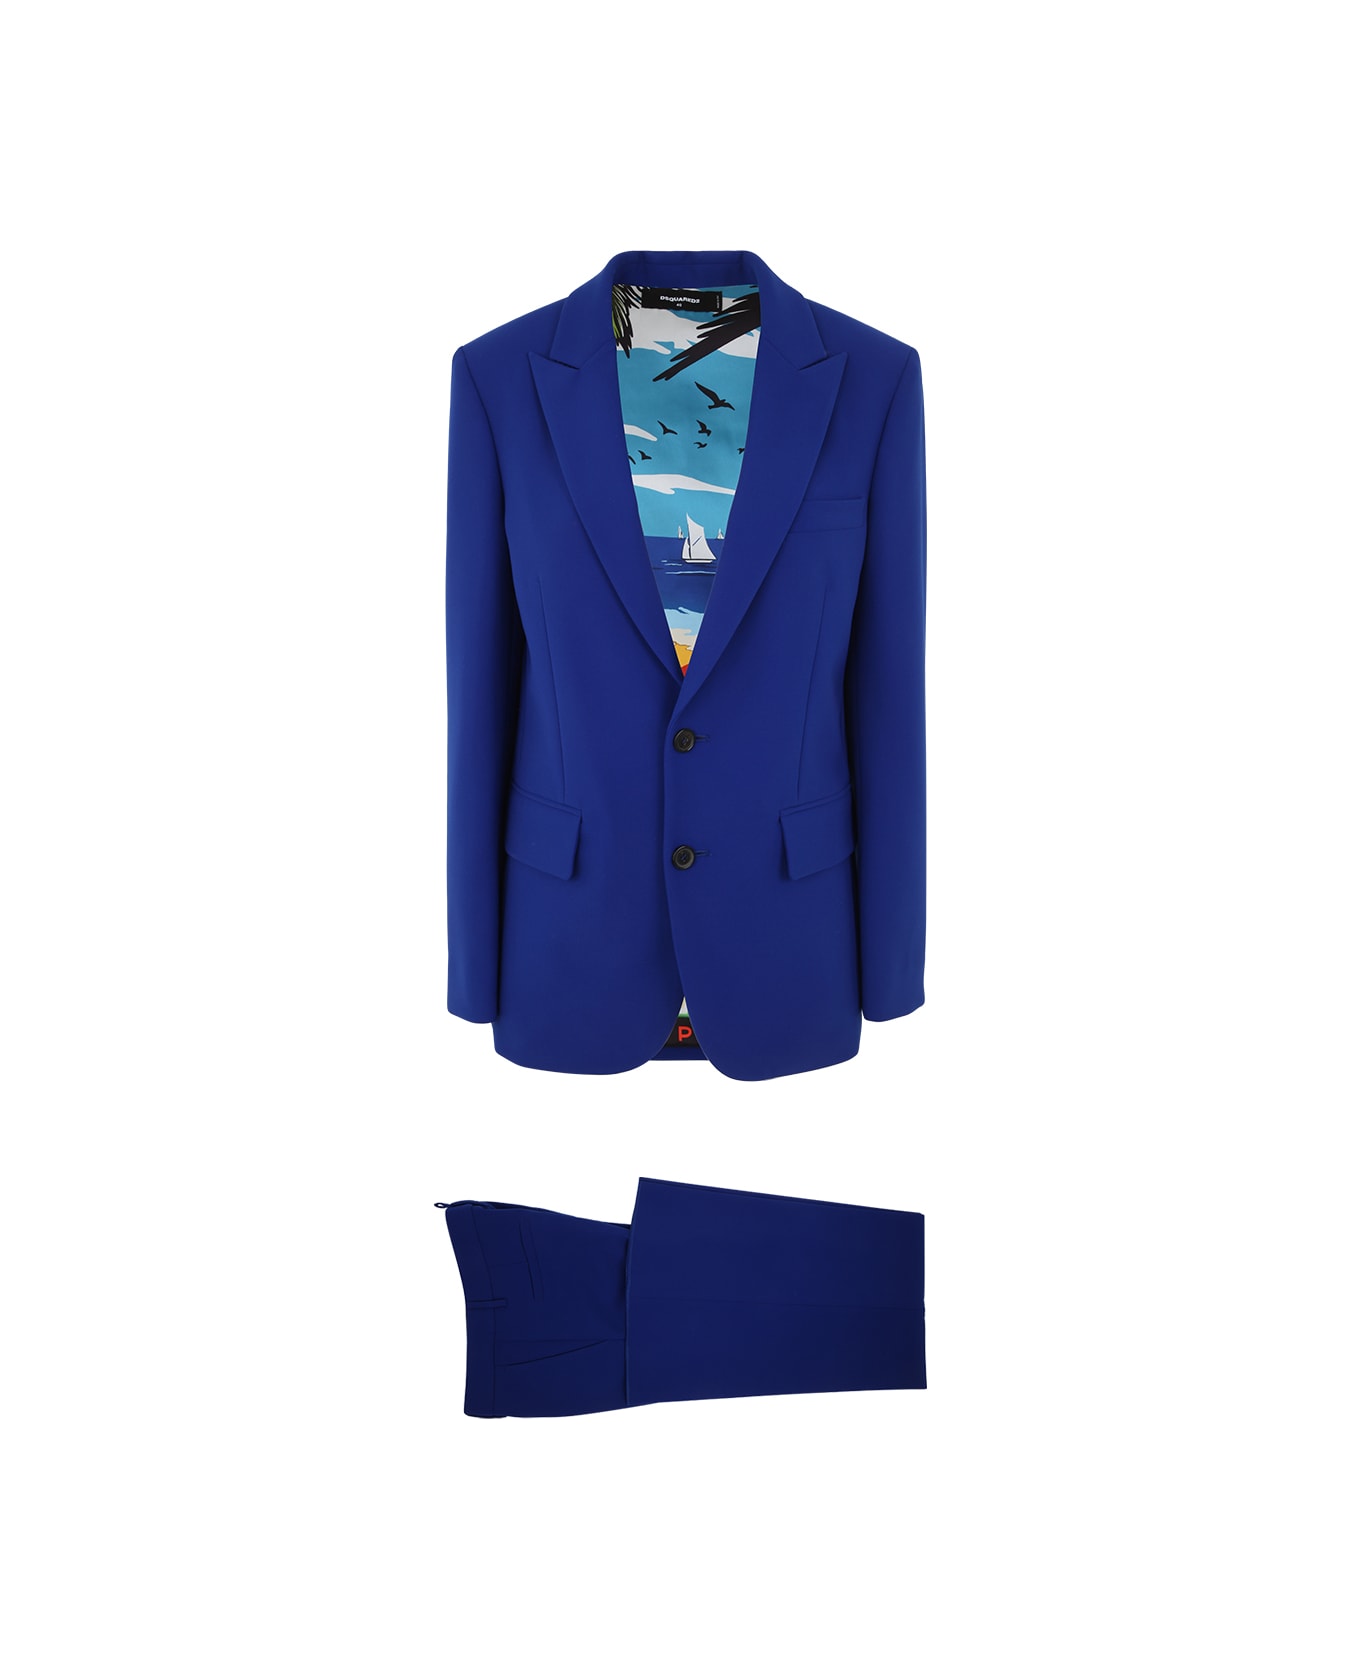 Dsquared2 Suit With Pockets - Ink Blue